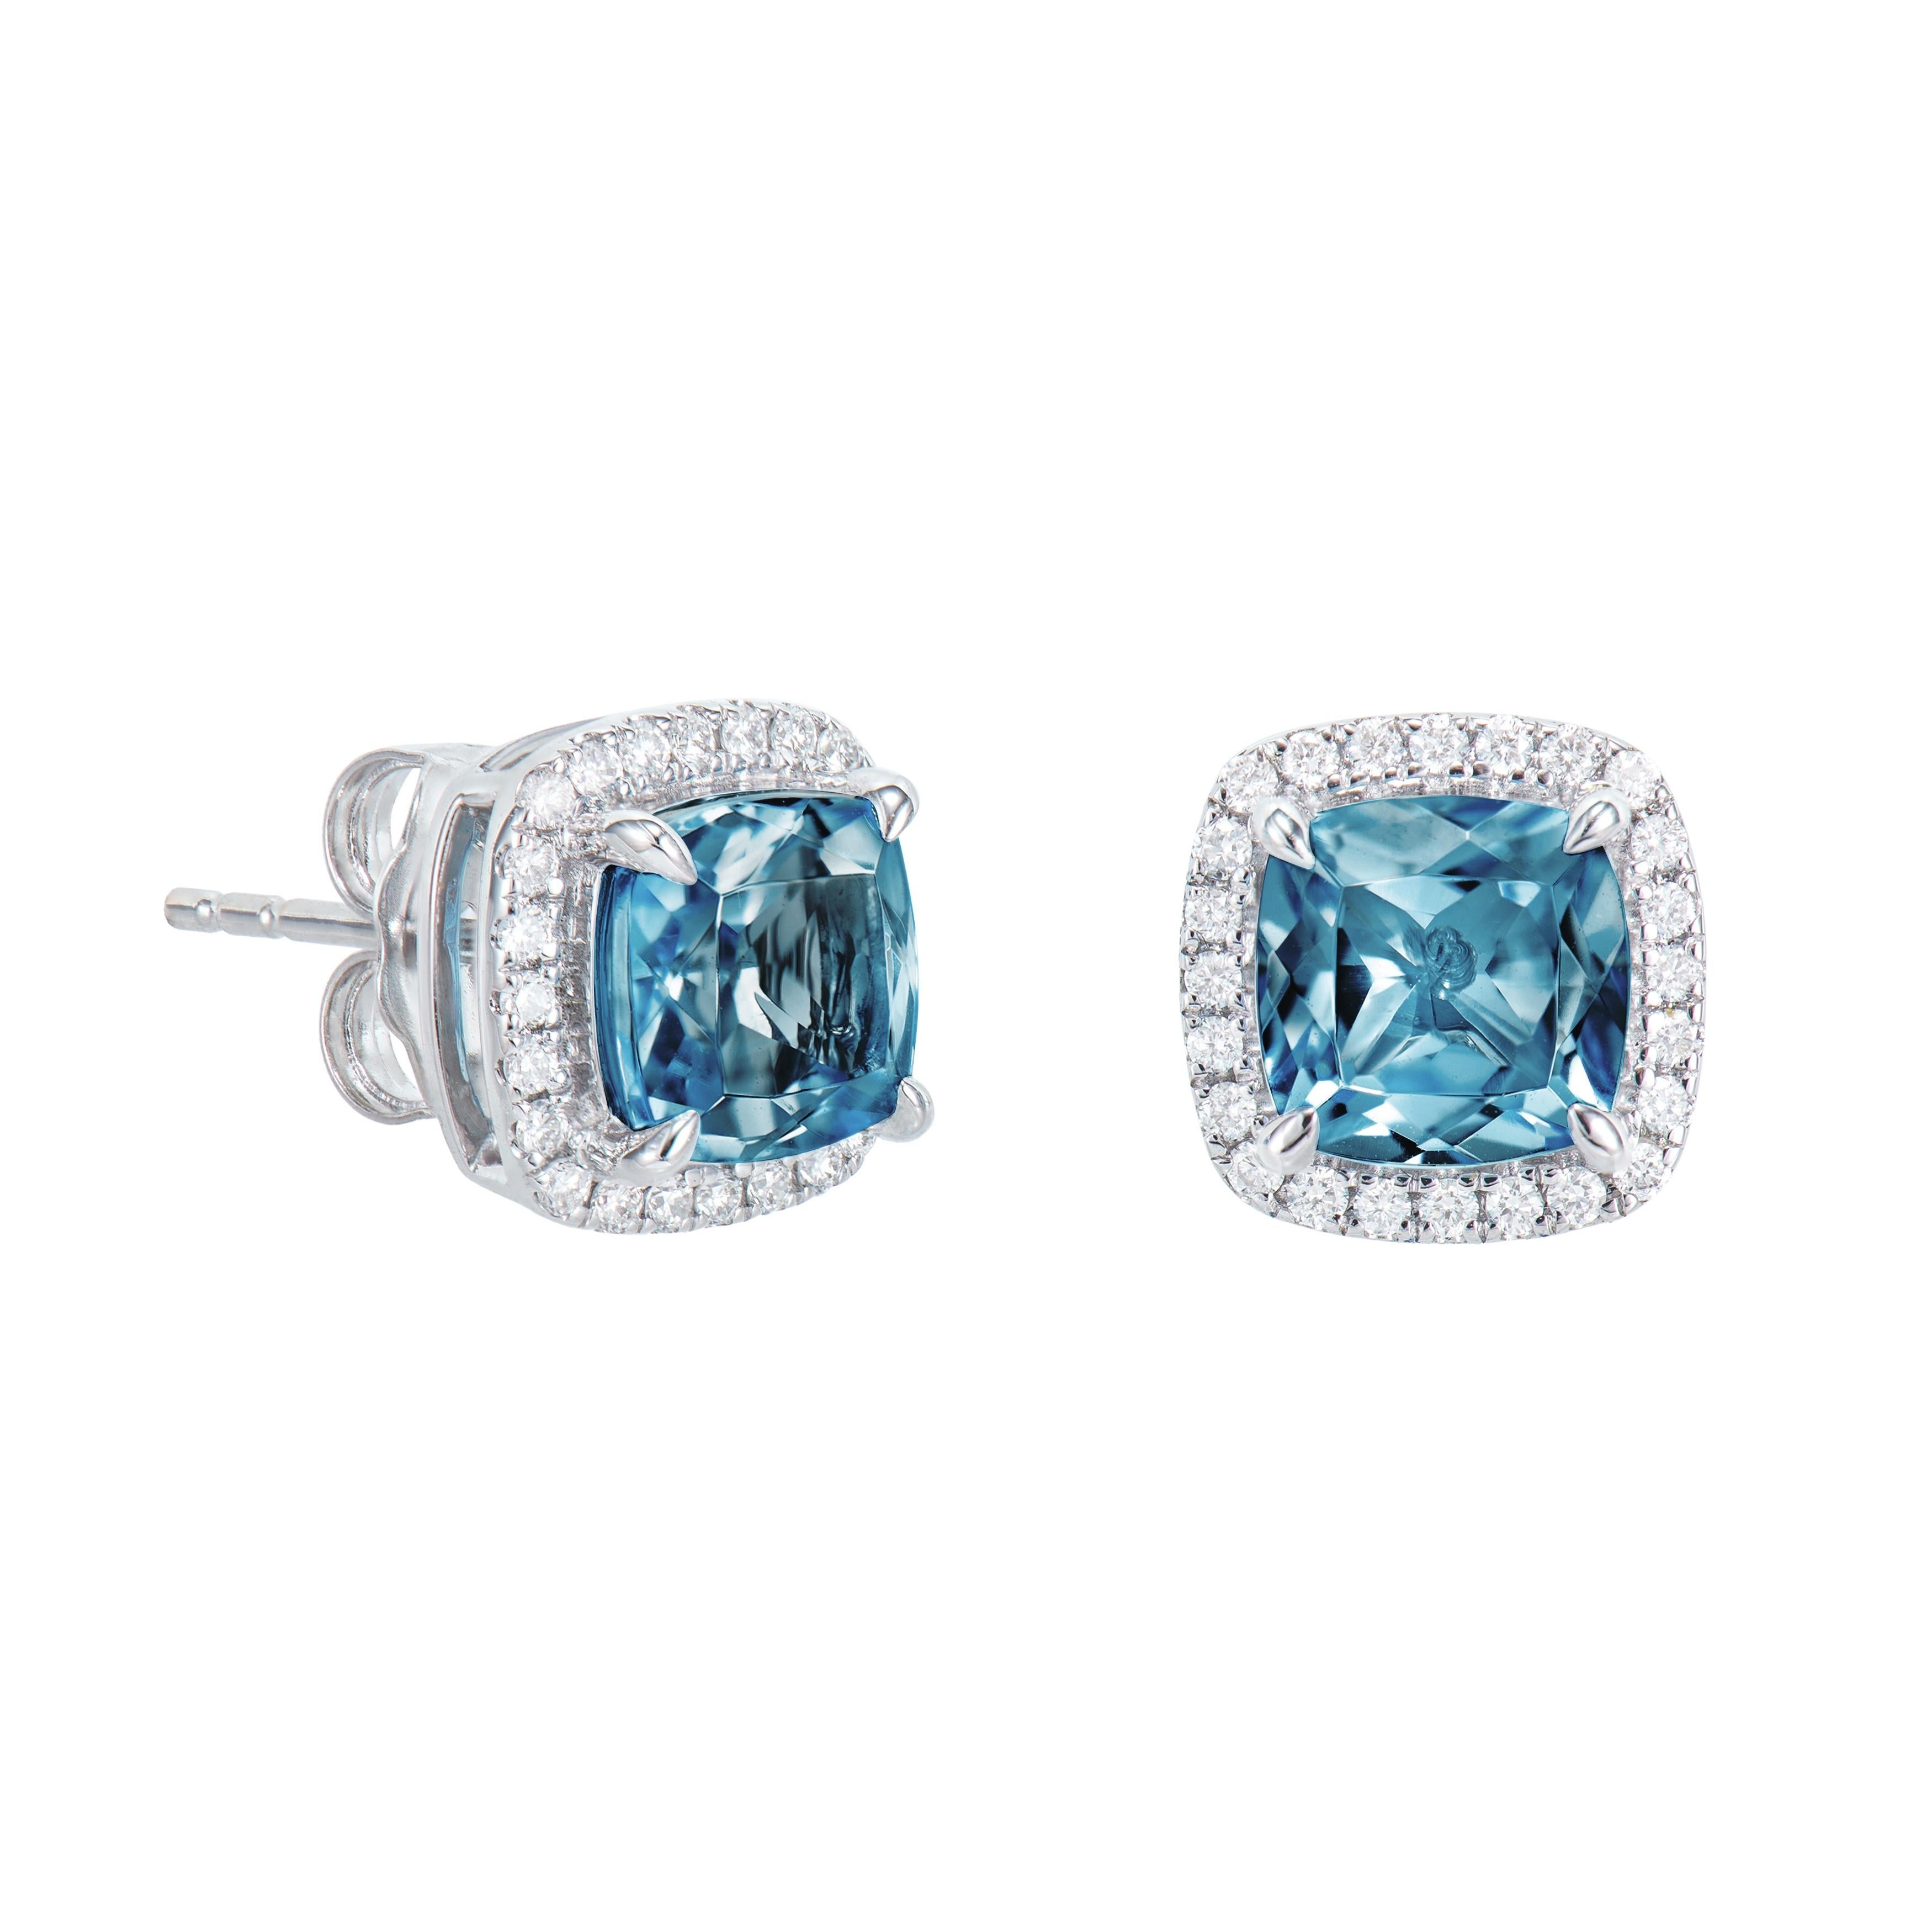 Presented A lovely collection of gems, including London Blue topaz, Amethyst, Peridot, Rhodolite, Sky Blue Topaz, Swiss Blue Topaz and Morganite is perfect for people who value quality and want to wear it to any occasion or celebration. The white